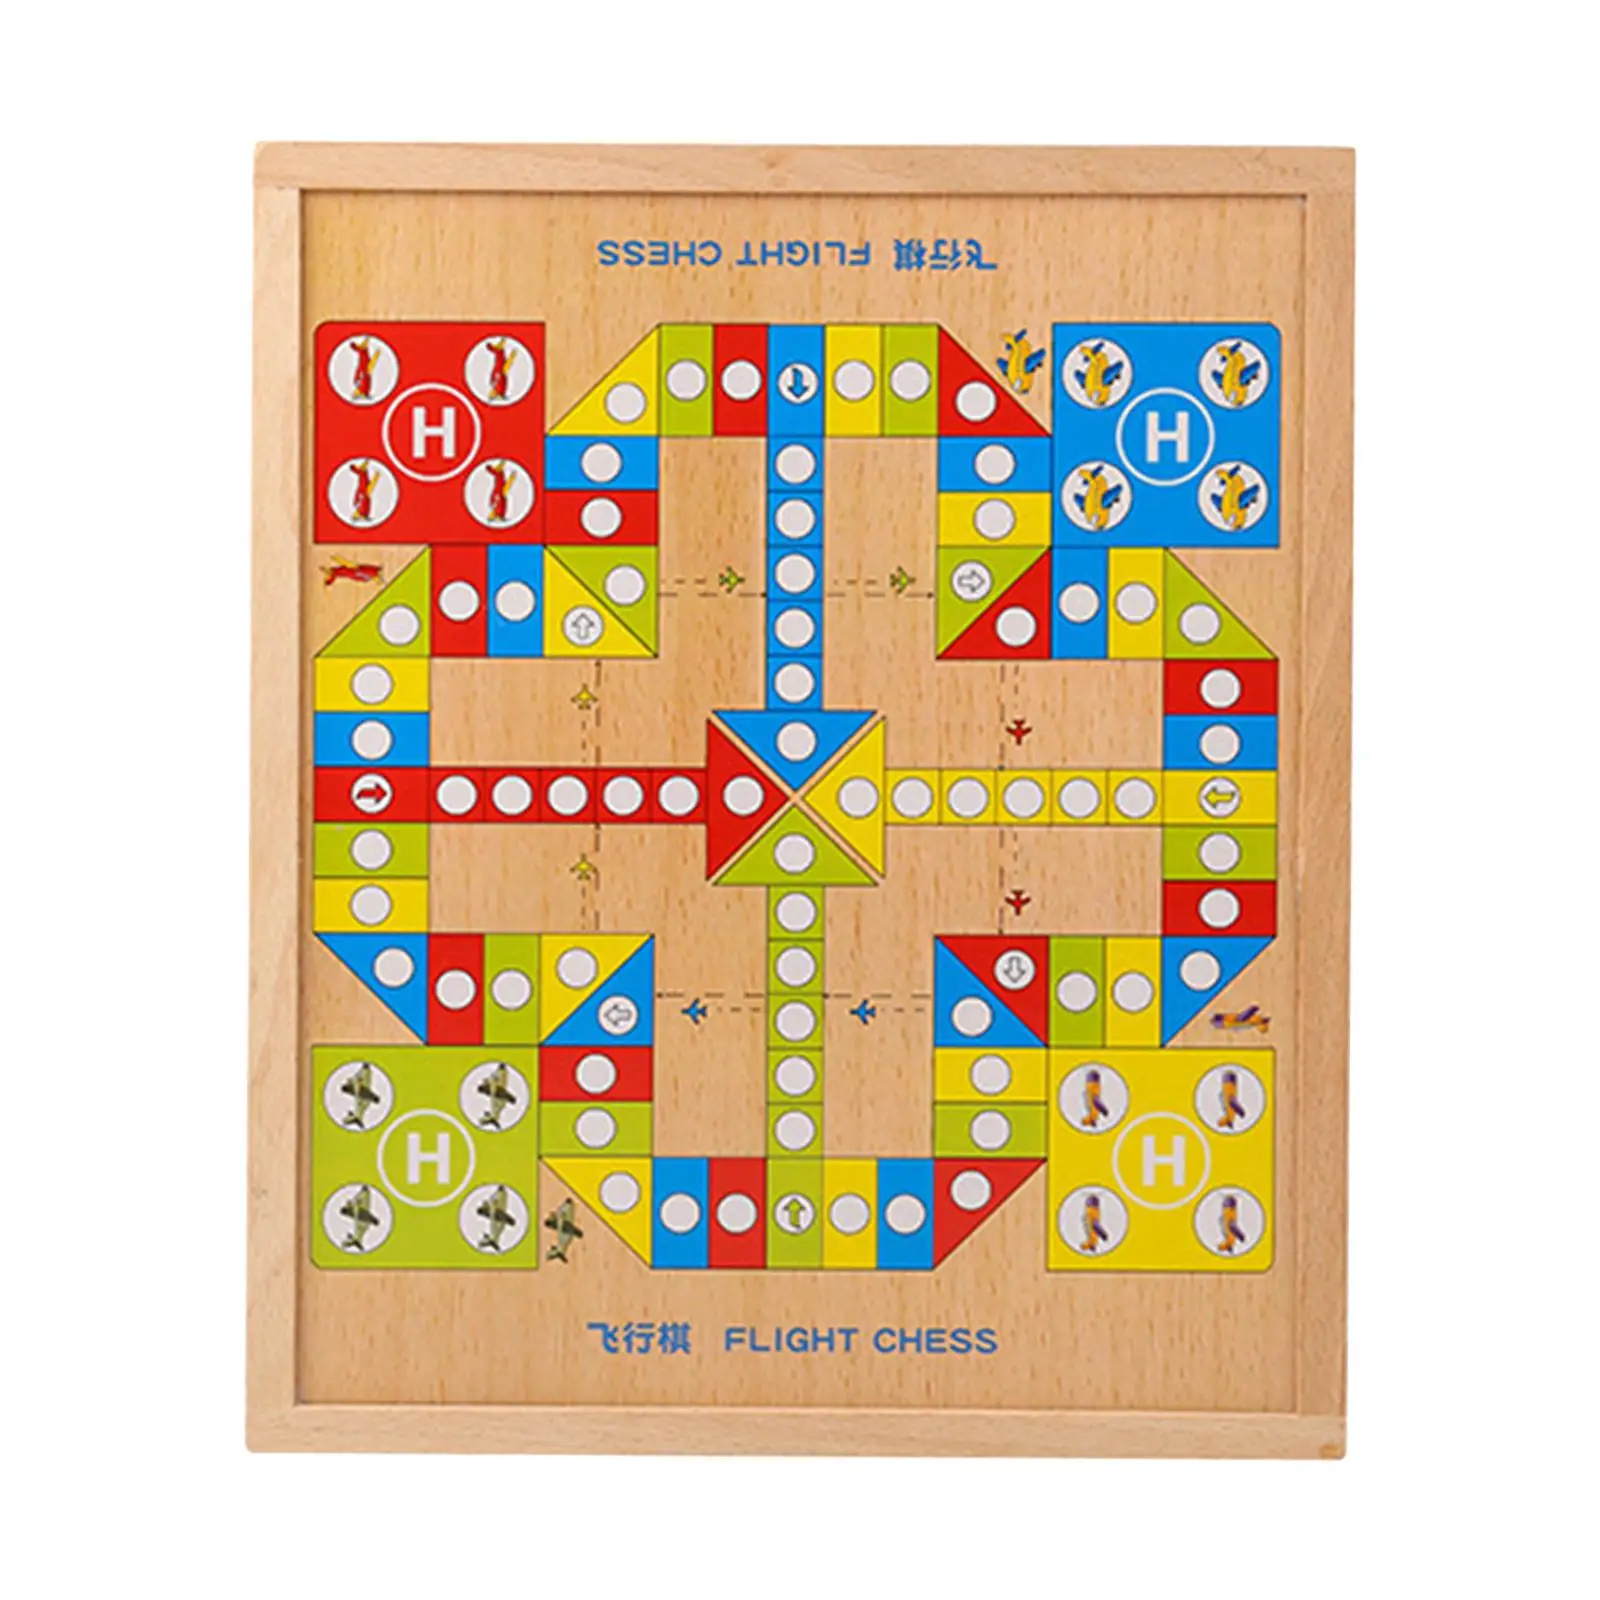 Puzzle Toys Match Learning Montessori Toy Early Educational Toys for Children Holiday Gifts